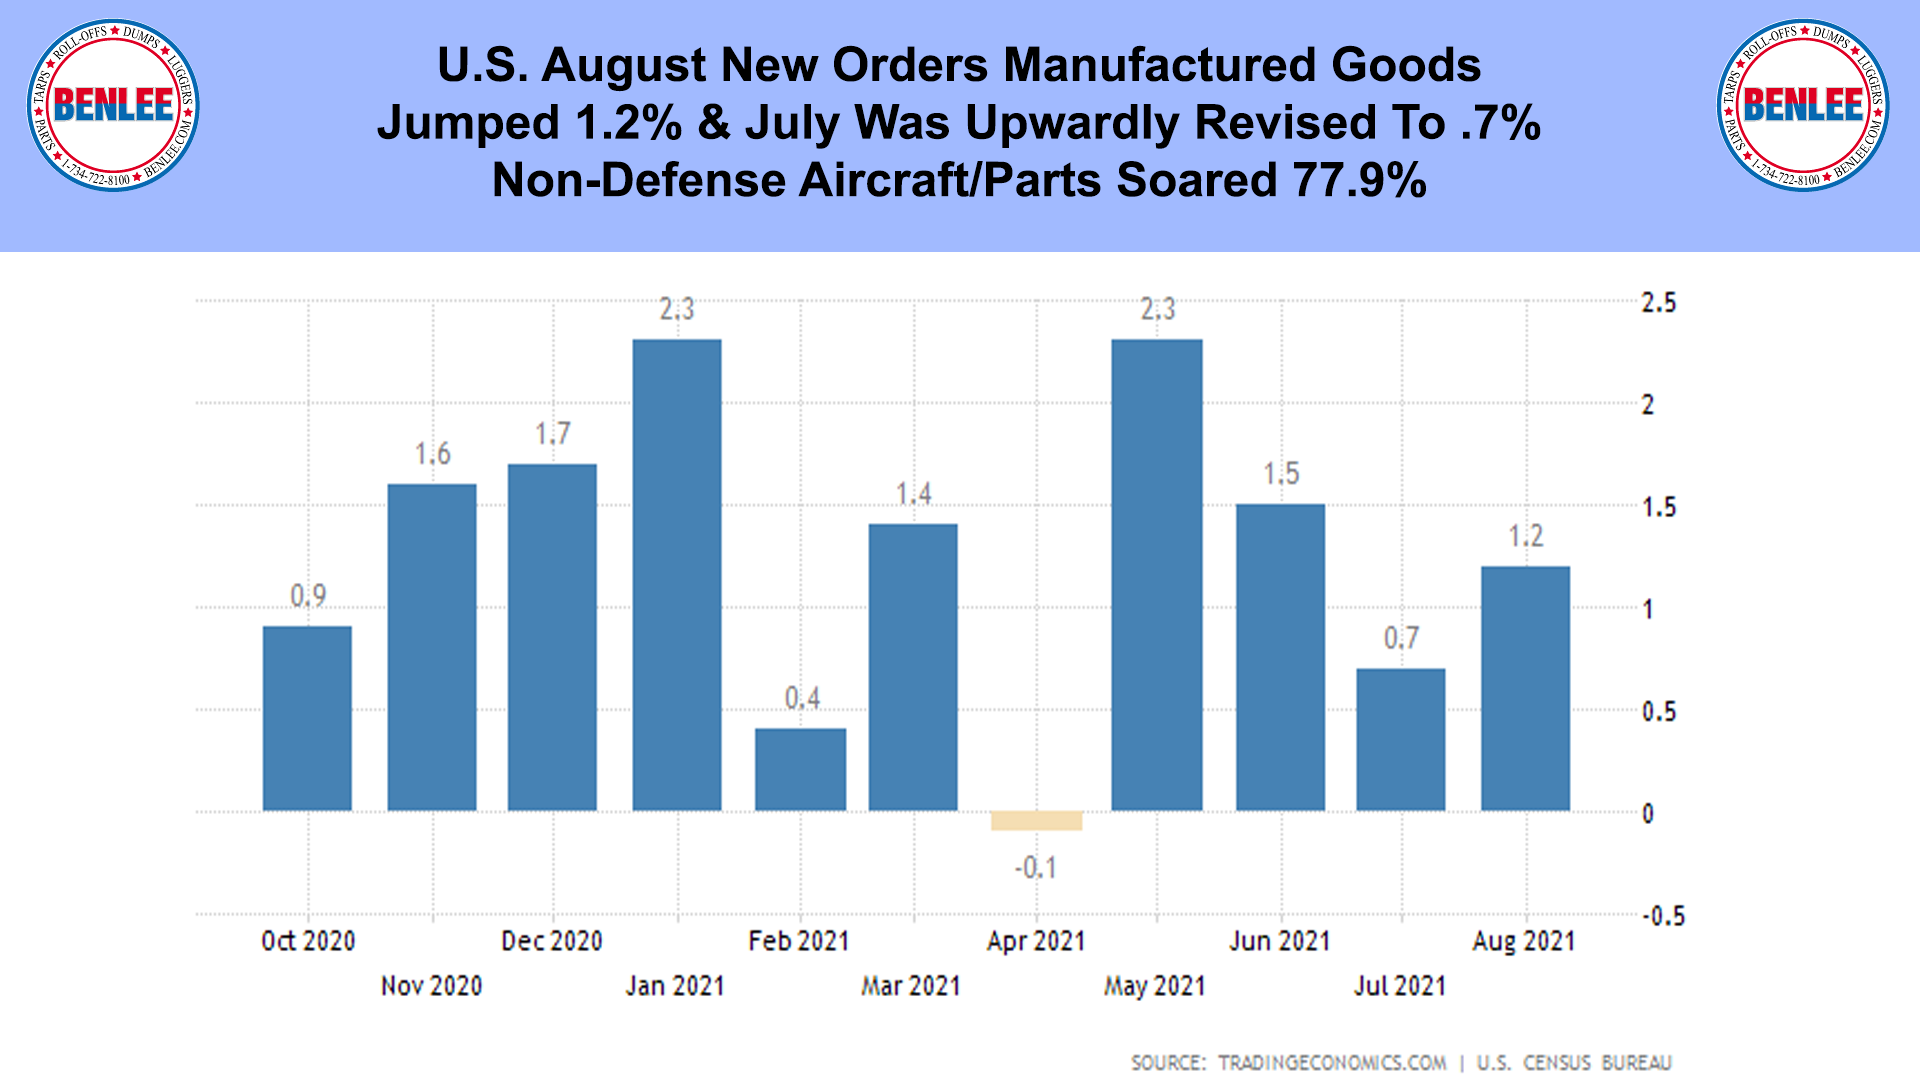 U.S. August New Orders Manufactured Goods